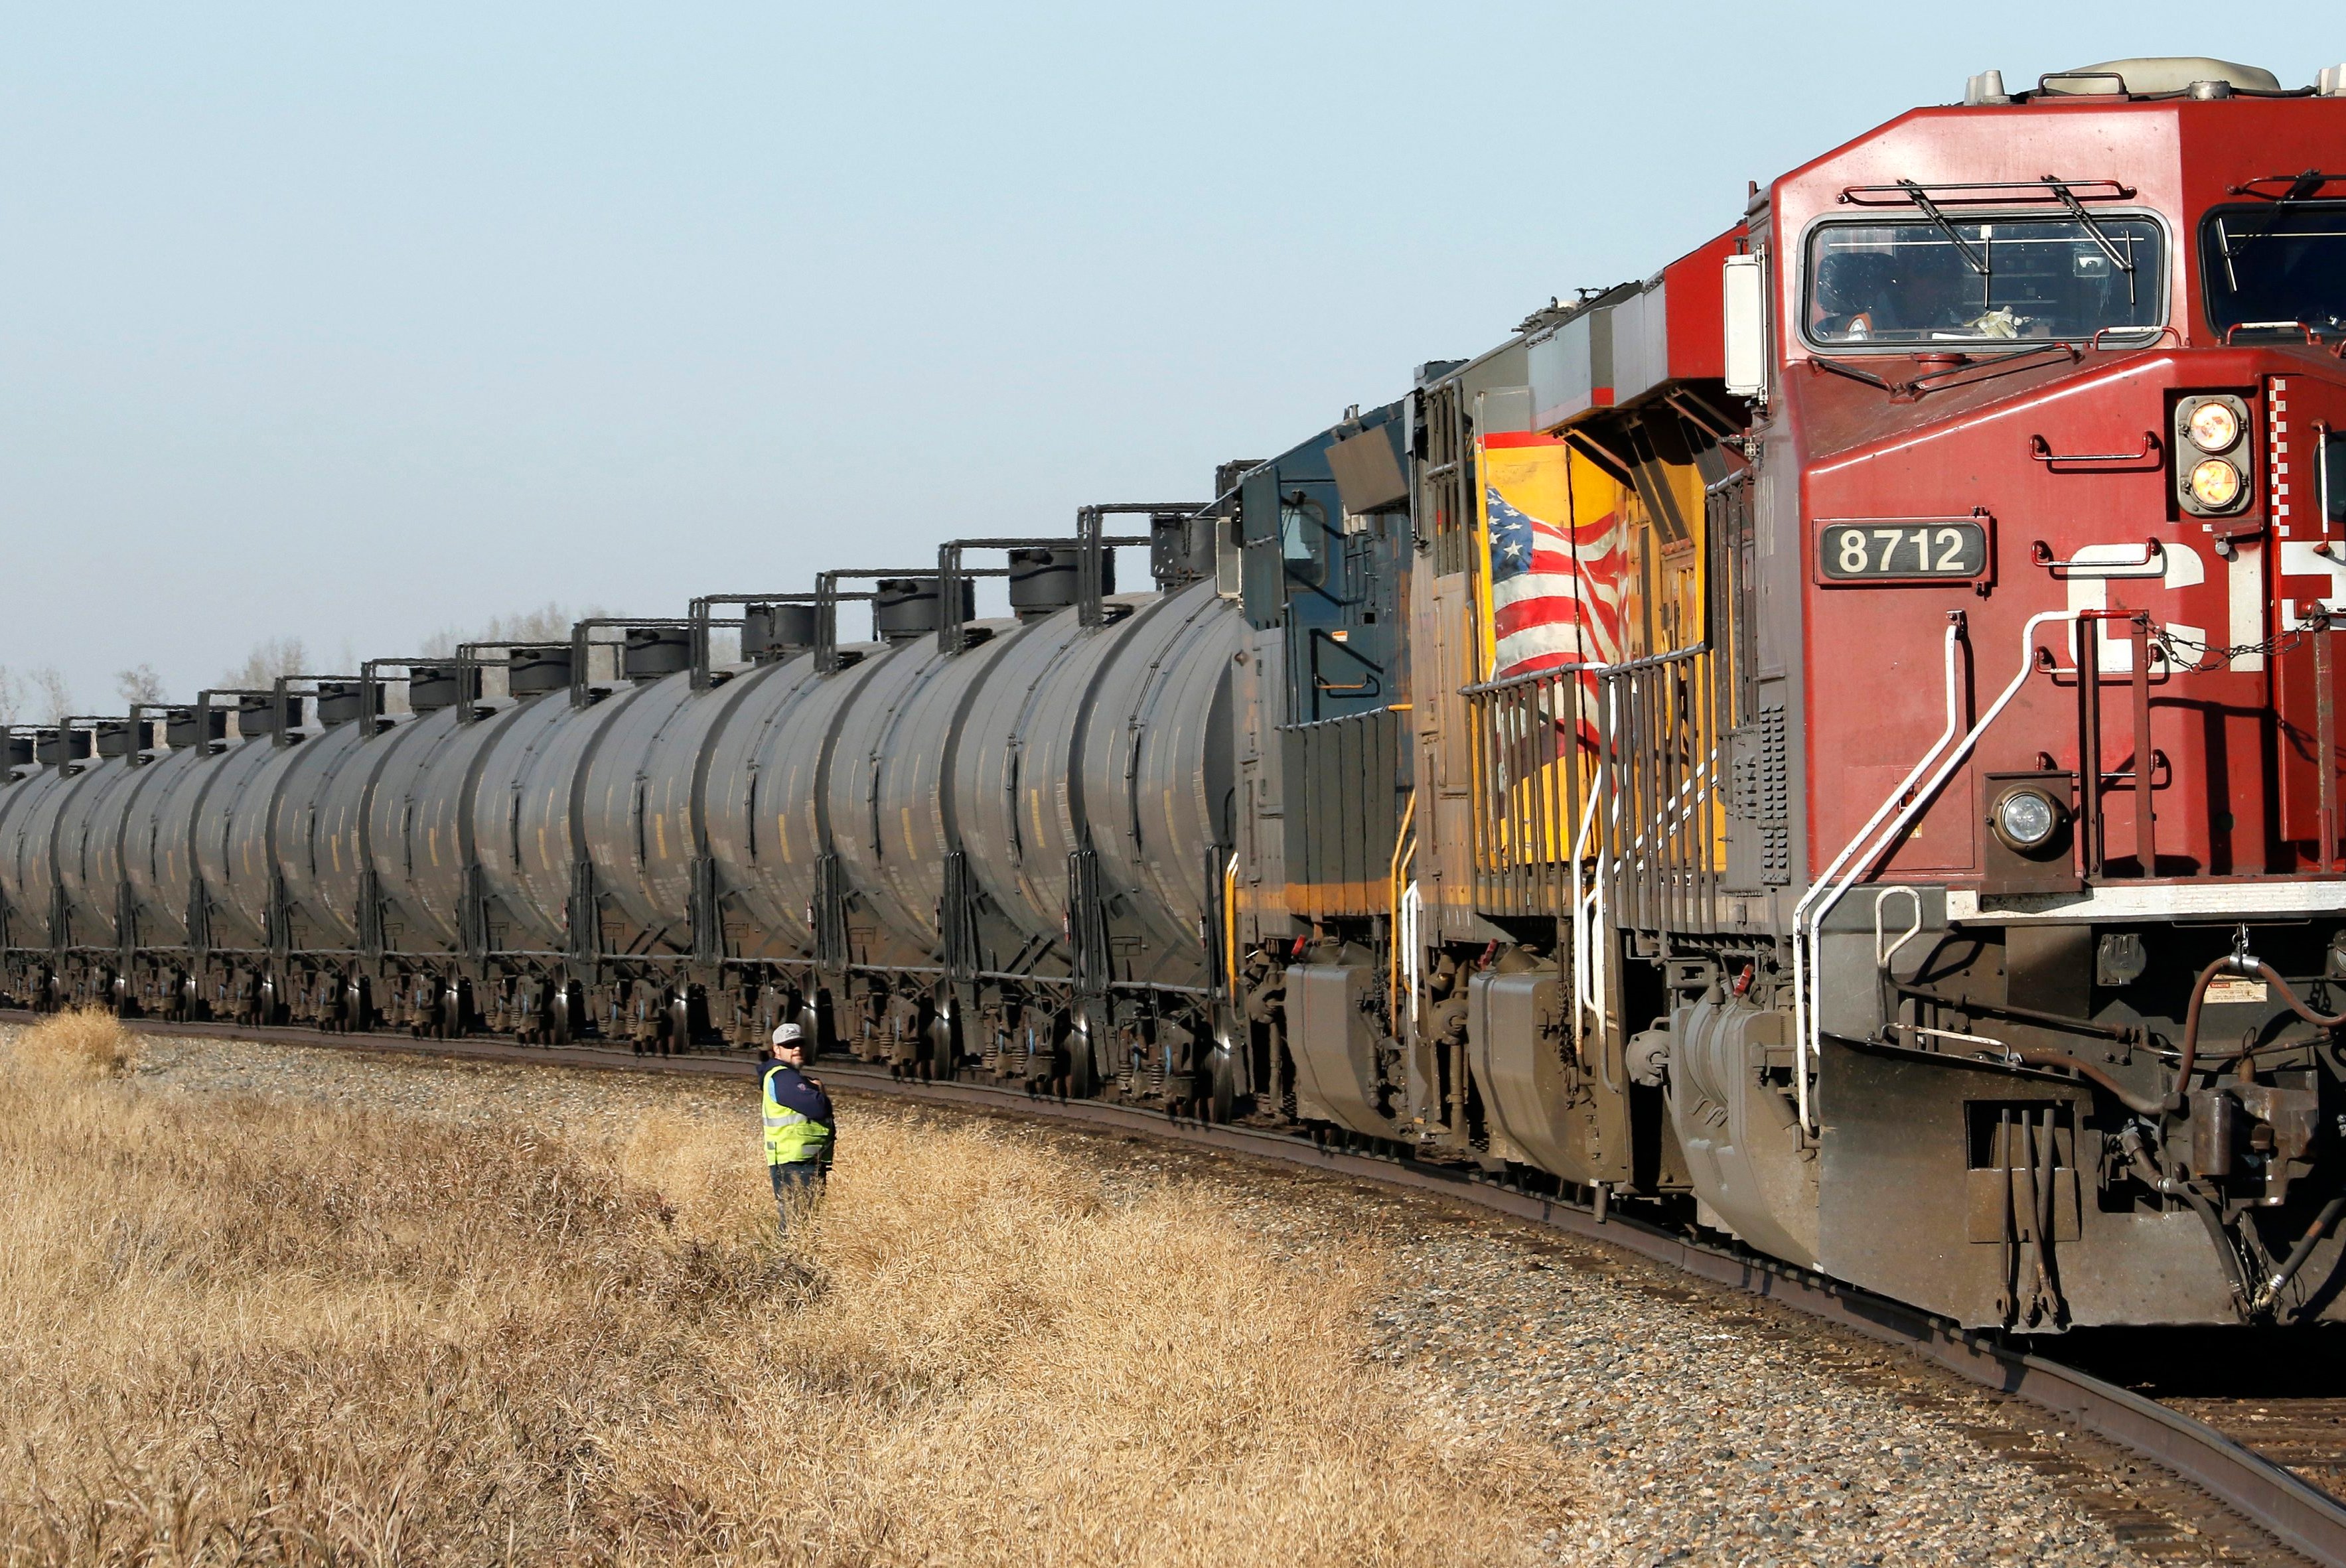 Crude oil, and other petroleum products, are transported in rail tanker cars on a Canadian Pacific Railway (CPR) train near Olds, Alberta, Canada on Tues., Oct. 23, 2018. 